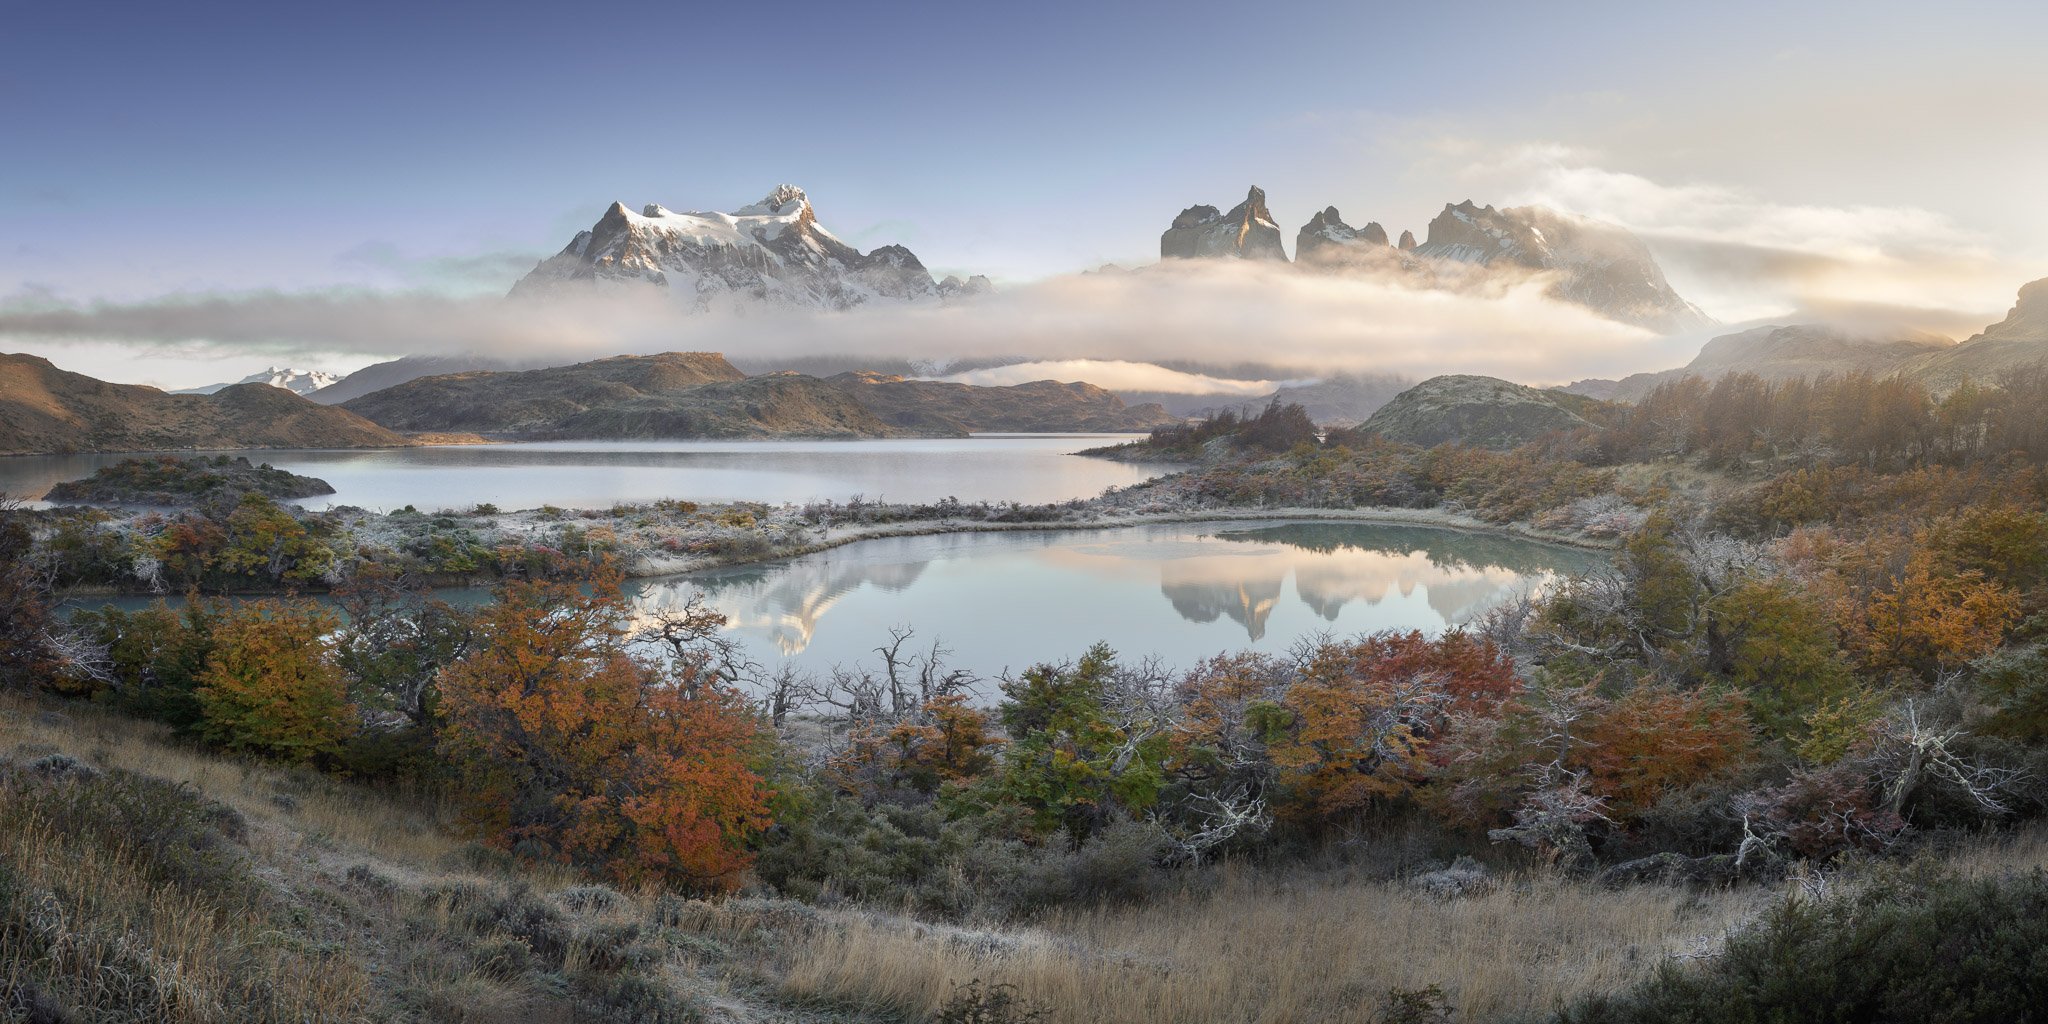 america, andes, beautiful, blue, chile, clouds, cuernos, del, frost, glacier, hiking, hill, ice, lake, landmark, landscape, light, mirror, morning, mountain, national, nature, orange, outdoor, paine, pano, panorama, panoramic, park, patagonia, peak, pehoe, Andrey Omelyanchuk